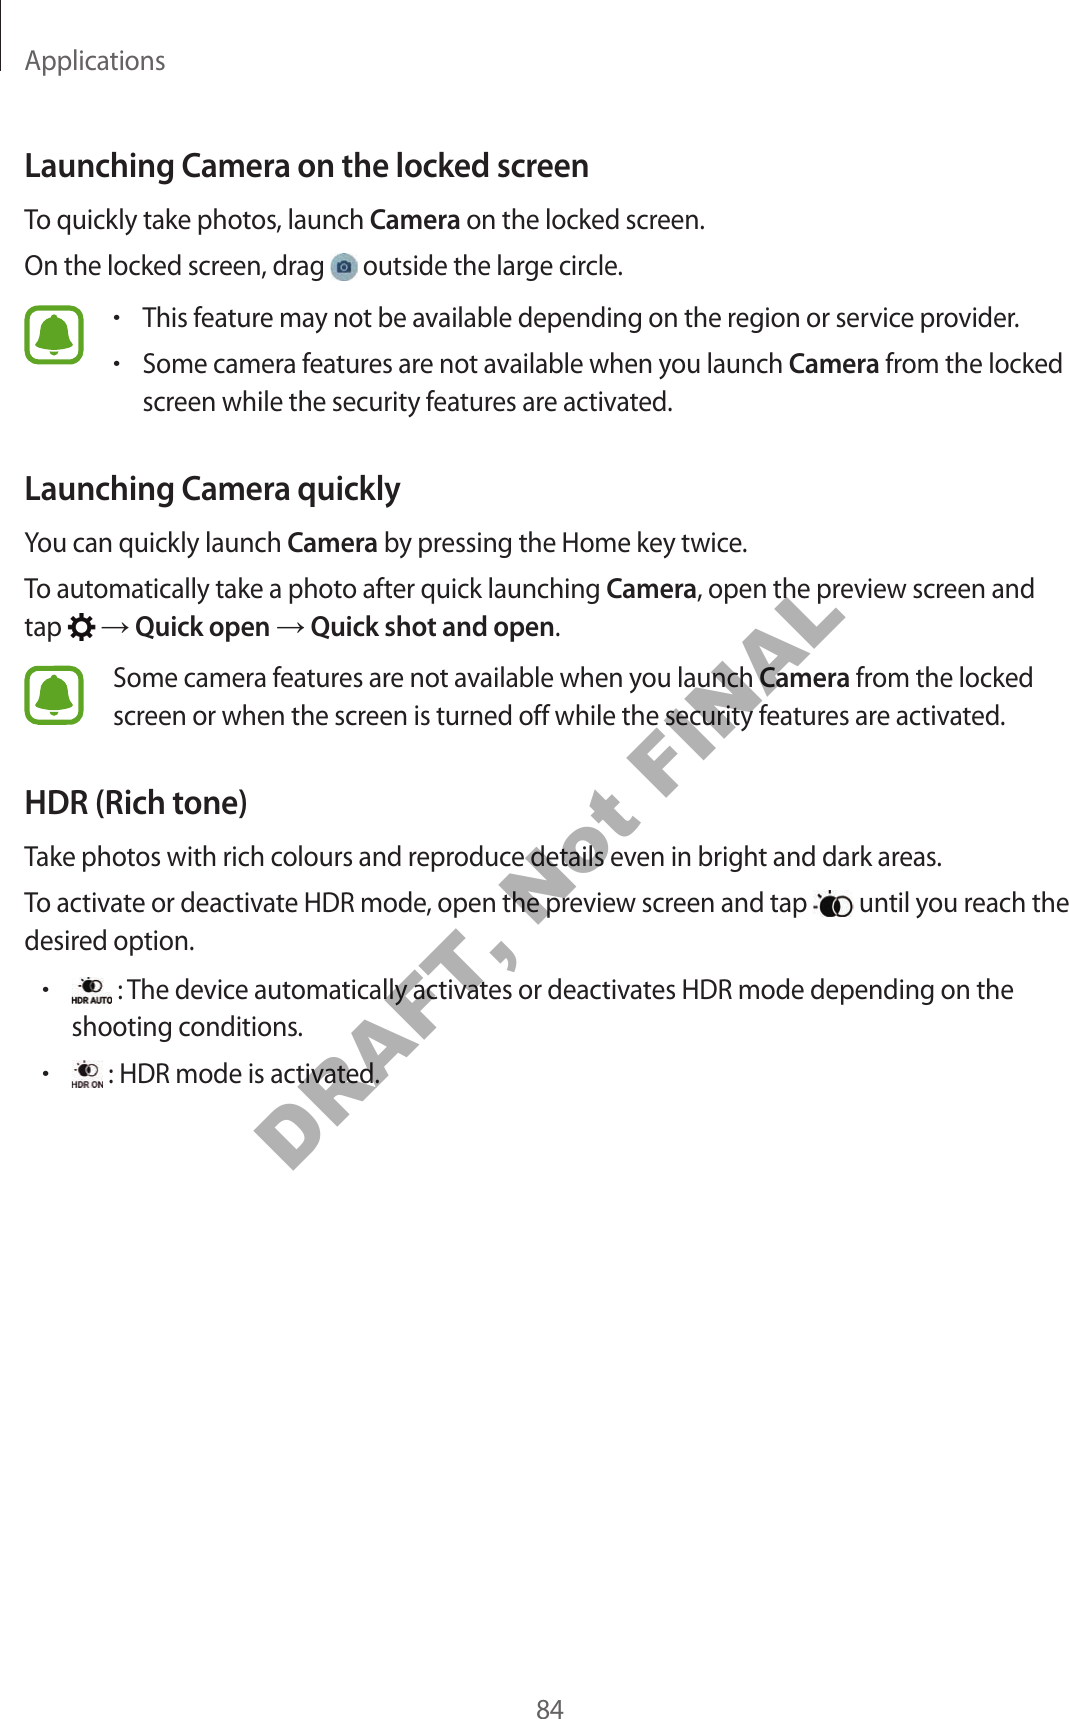 Applications84Launching Camera on the locked screenTo quickly take photos, launch Camera on the locked screen.On the locked screen, drag   outside the large circle.•This feature may not be available depending on the region or service provider.•Some camera features are not available when you launch Camera from the locked screen while the security features are activated.Launching Camera quicklyYou can quickly launch Camera by pressing the Home key twice.To automatically take a photo after quick launching Camera, open the preview screen and tap    Quick open  Quick shot and open.Some camera features are not available when you launch Camera from the locked screen or when the screen is turned off while the security features are activated.HDR (Rich tone)Take photos with rich colours and reproduce details even in bright and dark areas.To activate or deactivate HDR mode, open the preview screen and tap   until you reach the desired option.• : The device automatically activates or deactivates HDR mode depending on the shooting conditions.• : HDR mode is activated.DRAFT, Not FINAL